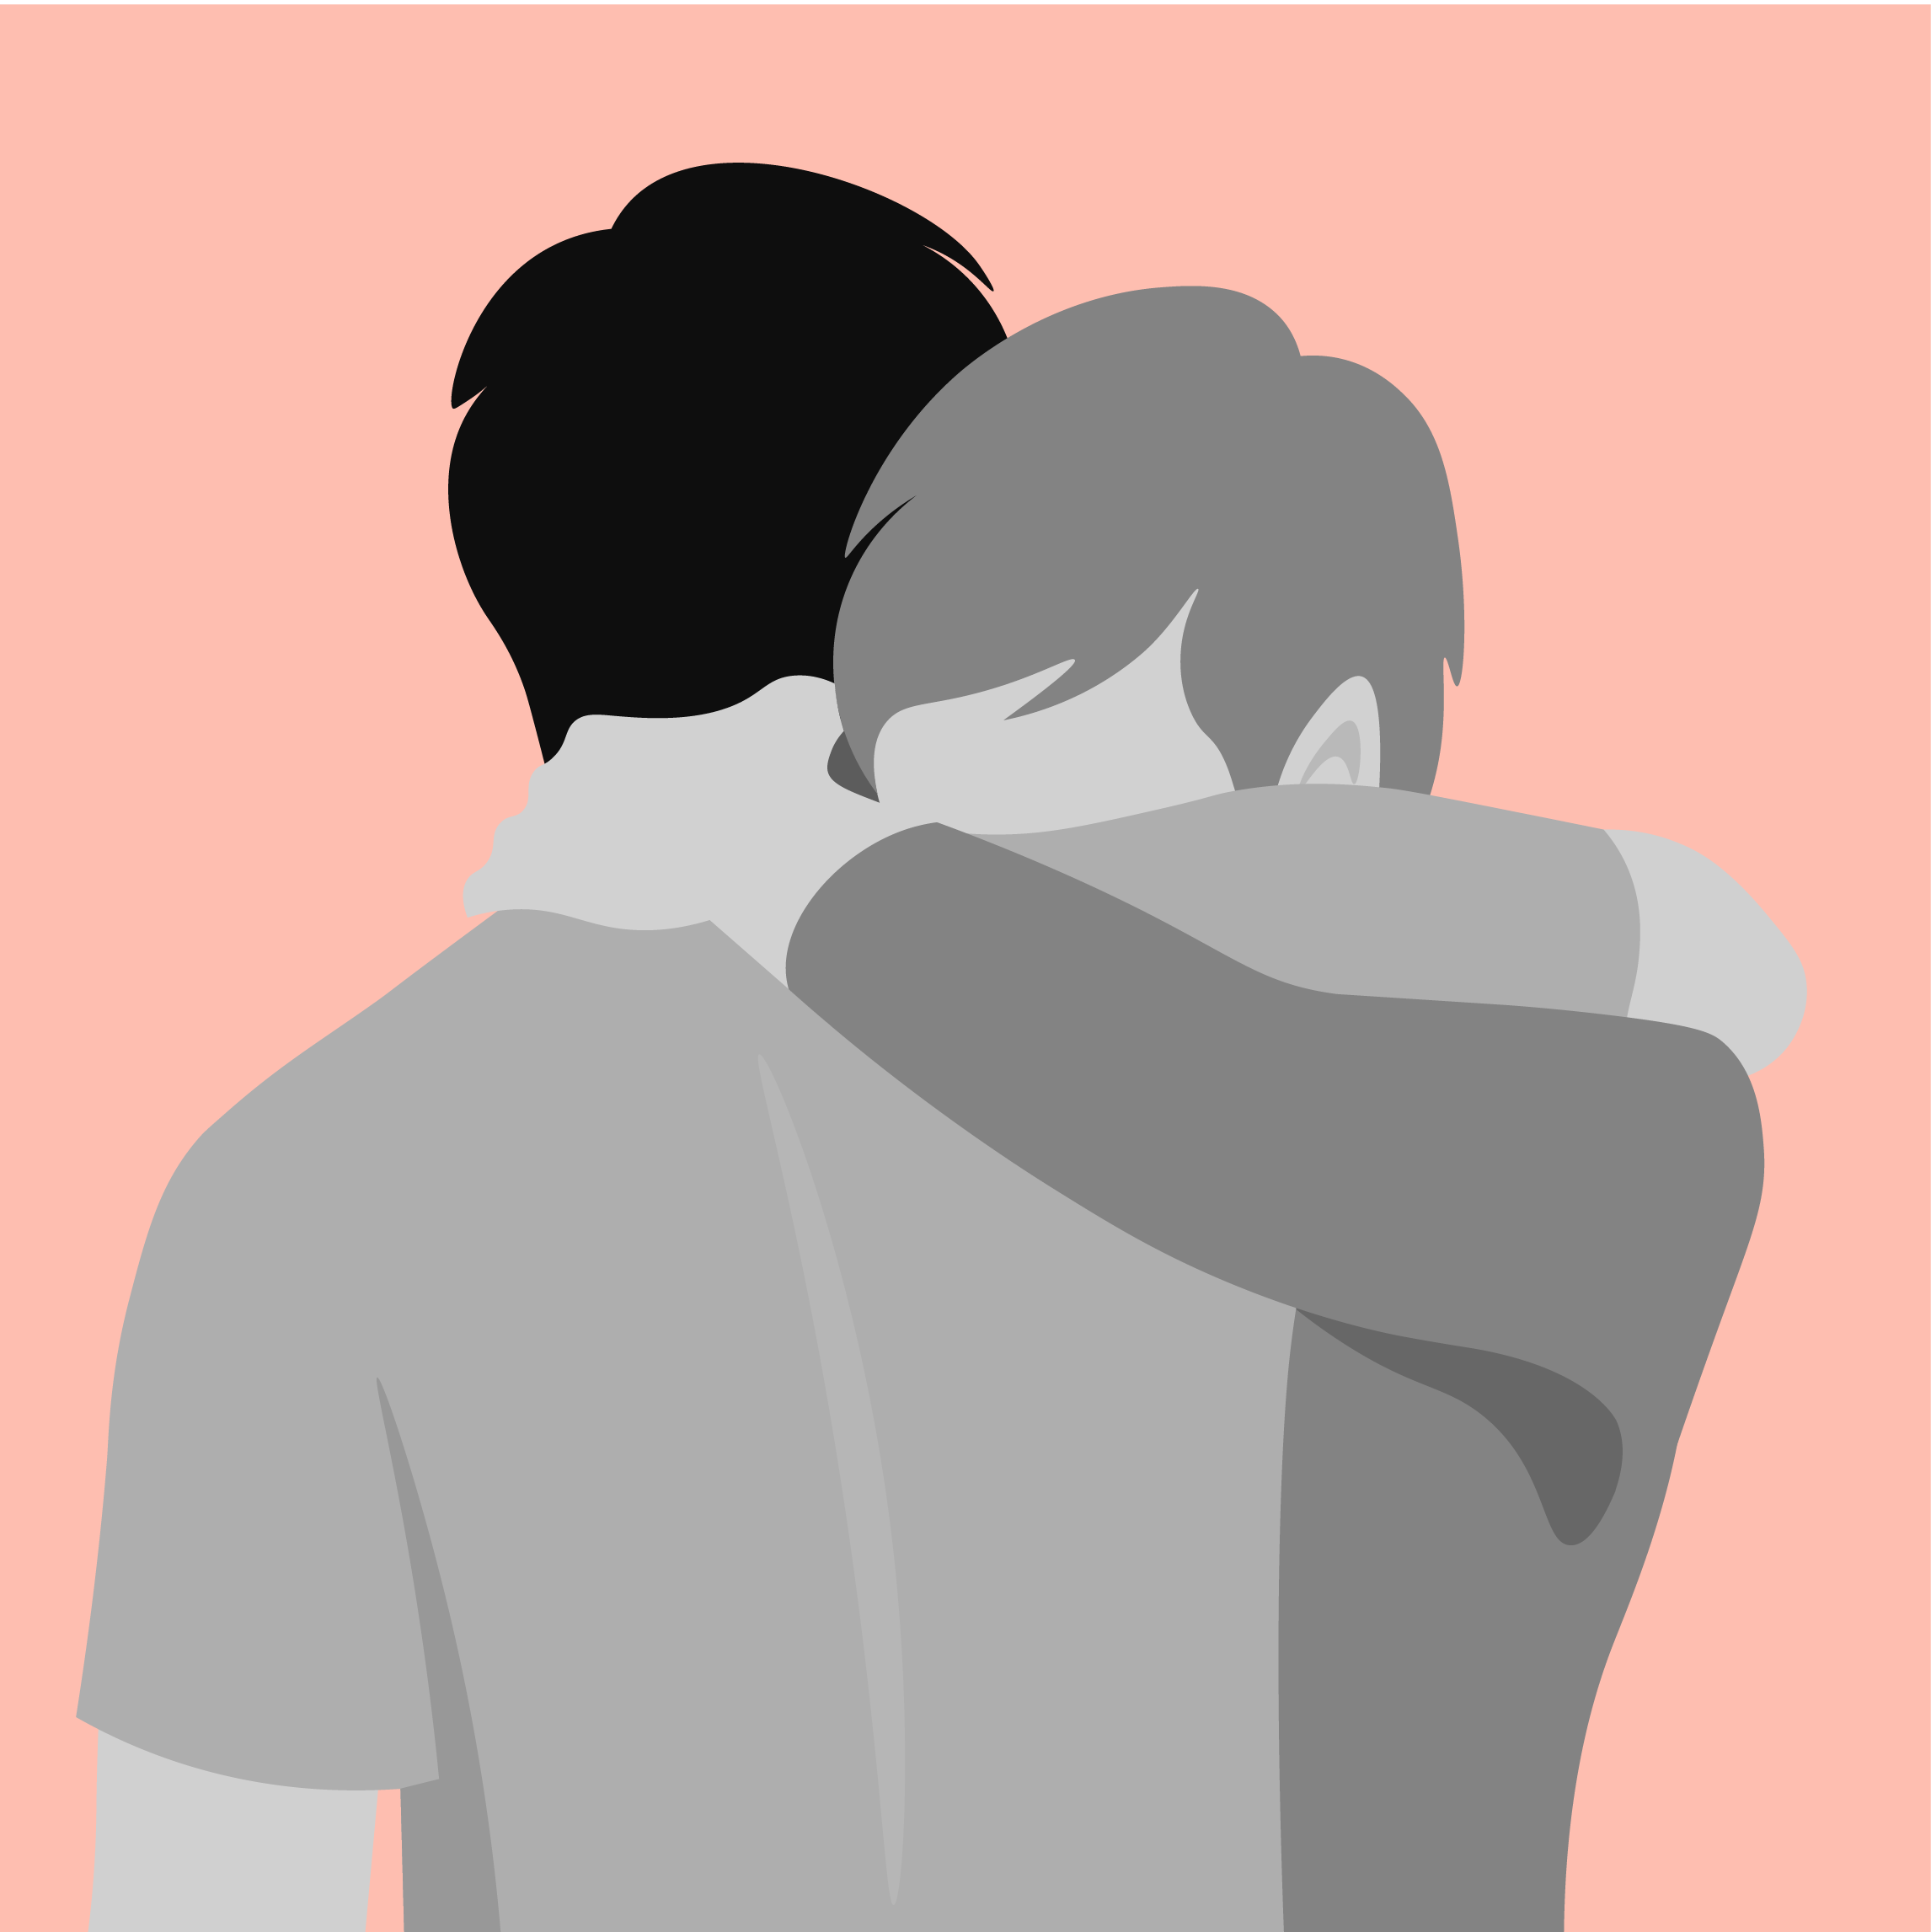 An illustration of two people embracing each other